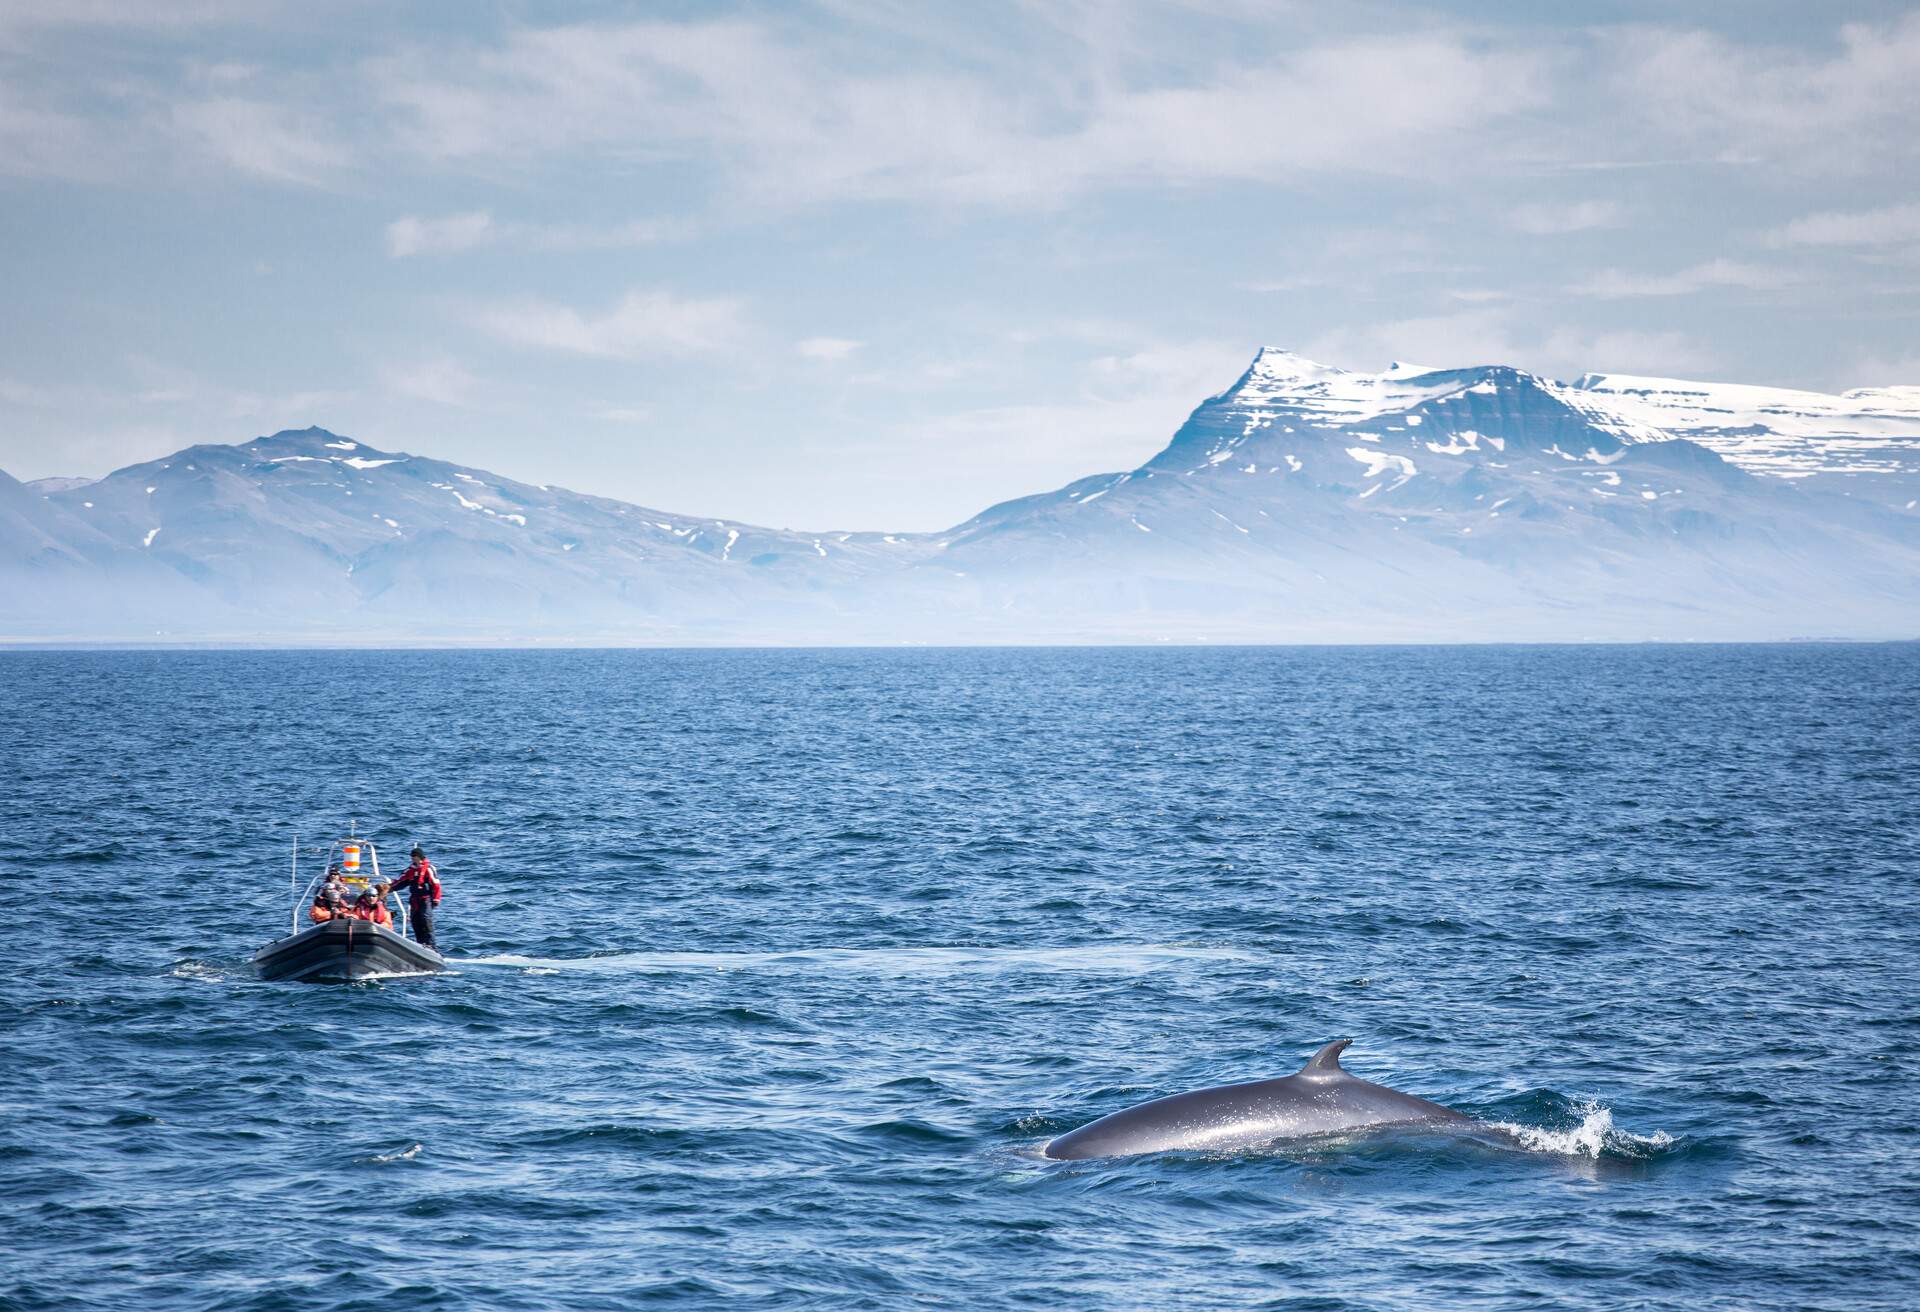 DEST_ICELAND_REYKJAVIK_WHALE_WATCHING_GettyImages-601162521